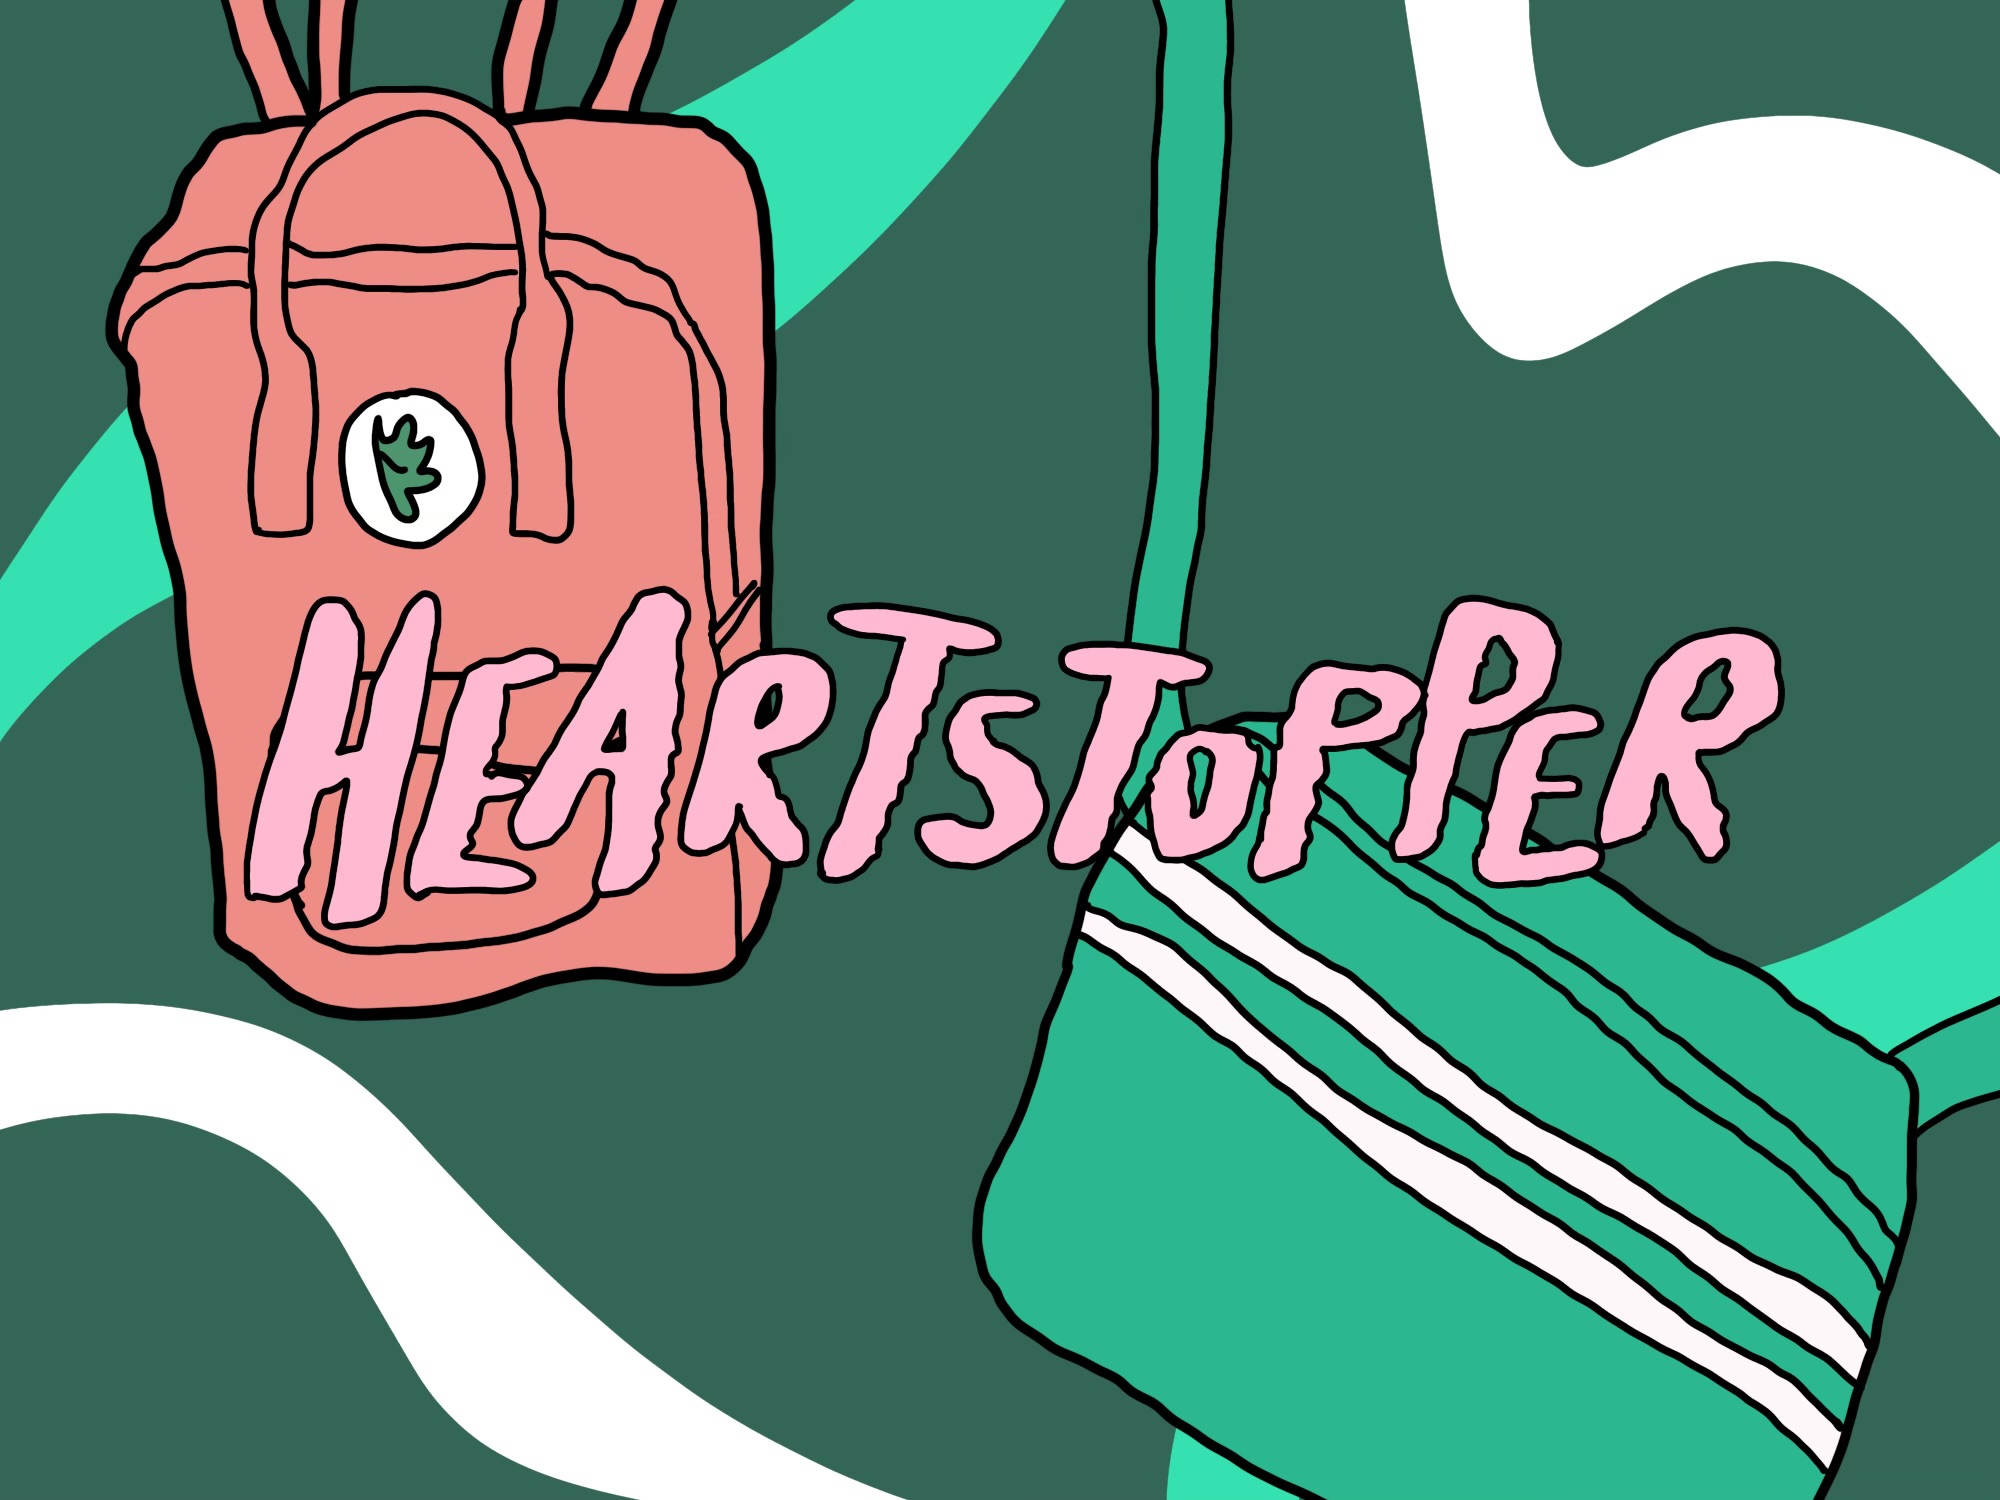 Heartstopper': A love story done right – The Daily Free Press